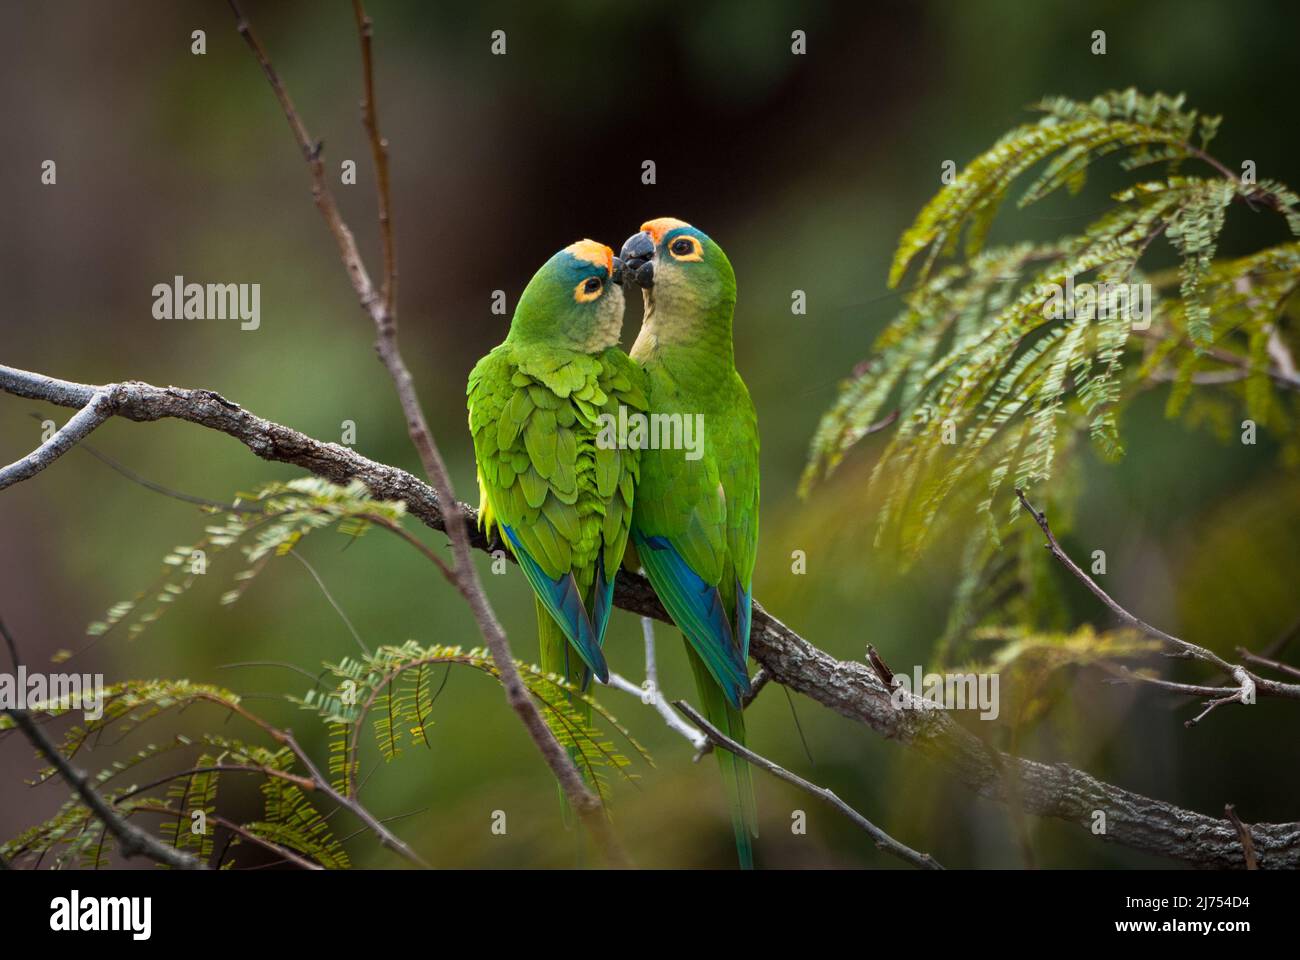 An affectionate pair of Peach-fronted Parakeets (Aratinga aurea) from Central Brazil Stock Photo